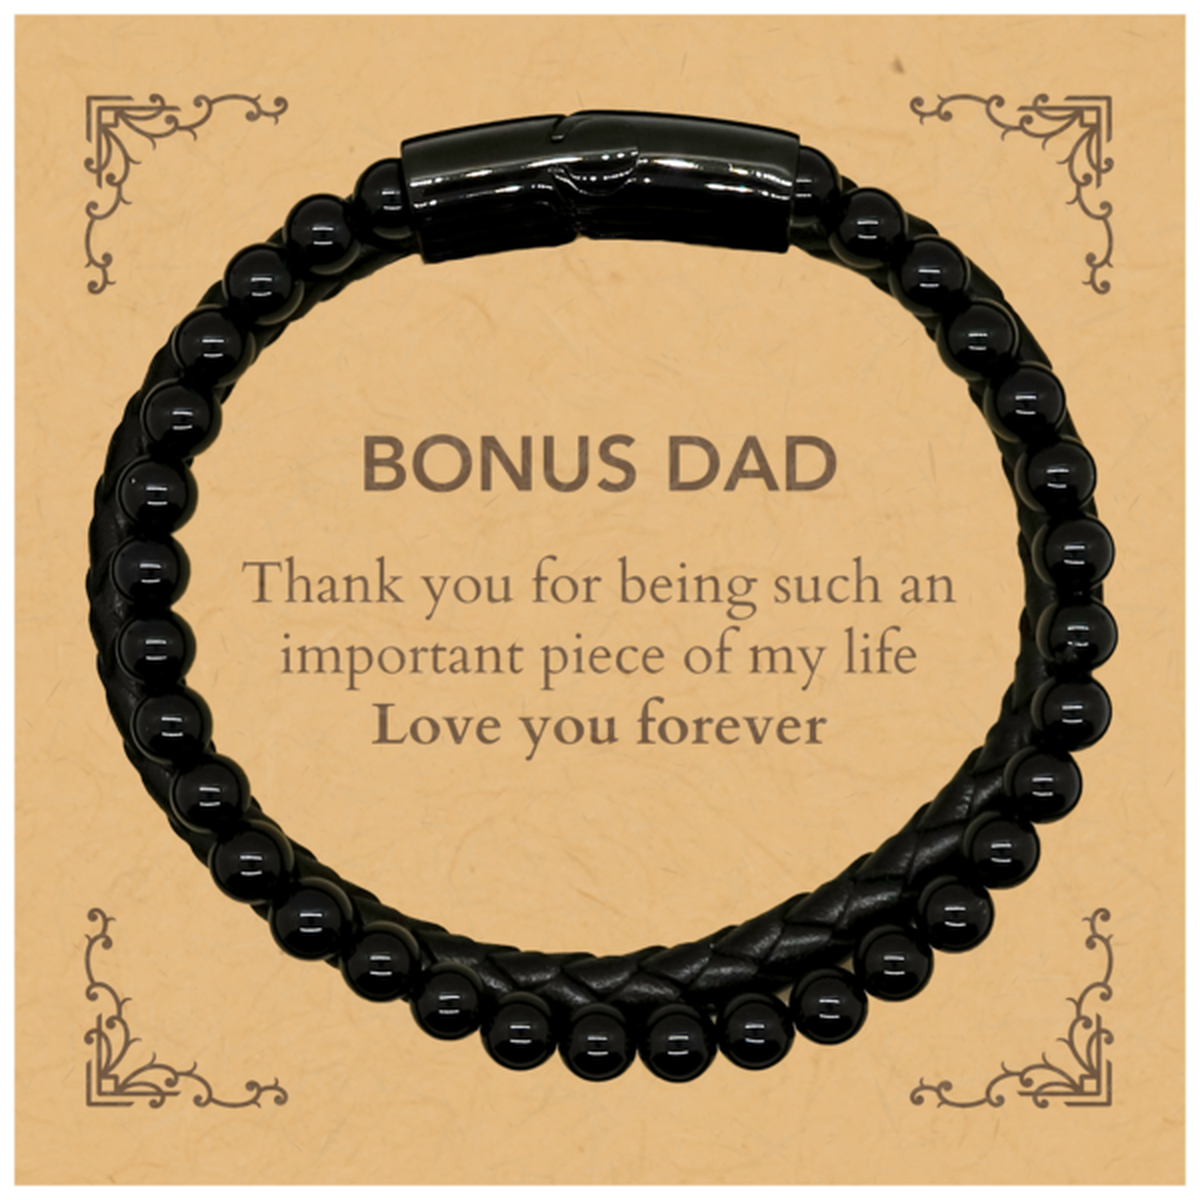 Appropriate Bonus Dad Stone Leather Bracelets Epic Birthday Gifts for Bonus Dad Thank you for being such an important piece of my life Bonus Dad Christmas Mothers Fathers Day